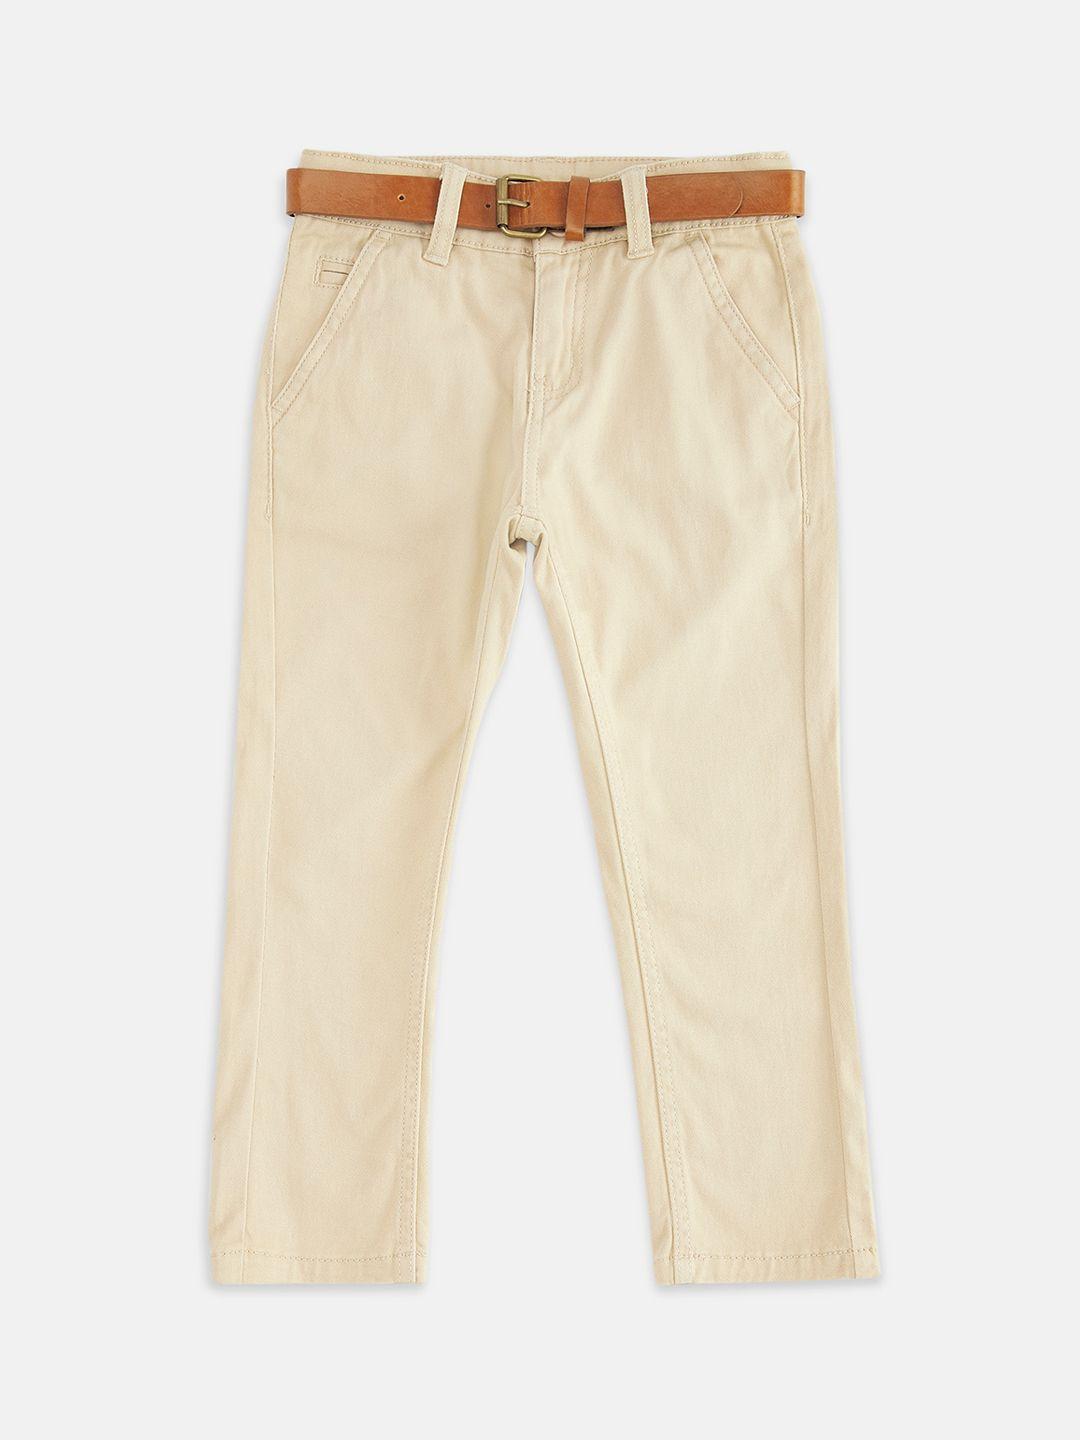 pantaloons junior boys beige pure cotton chinos trousers